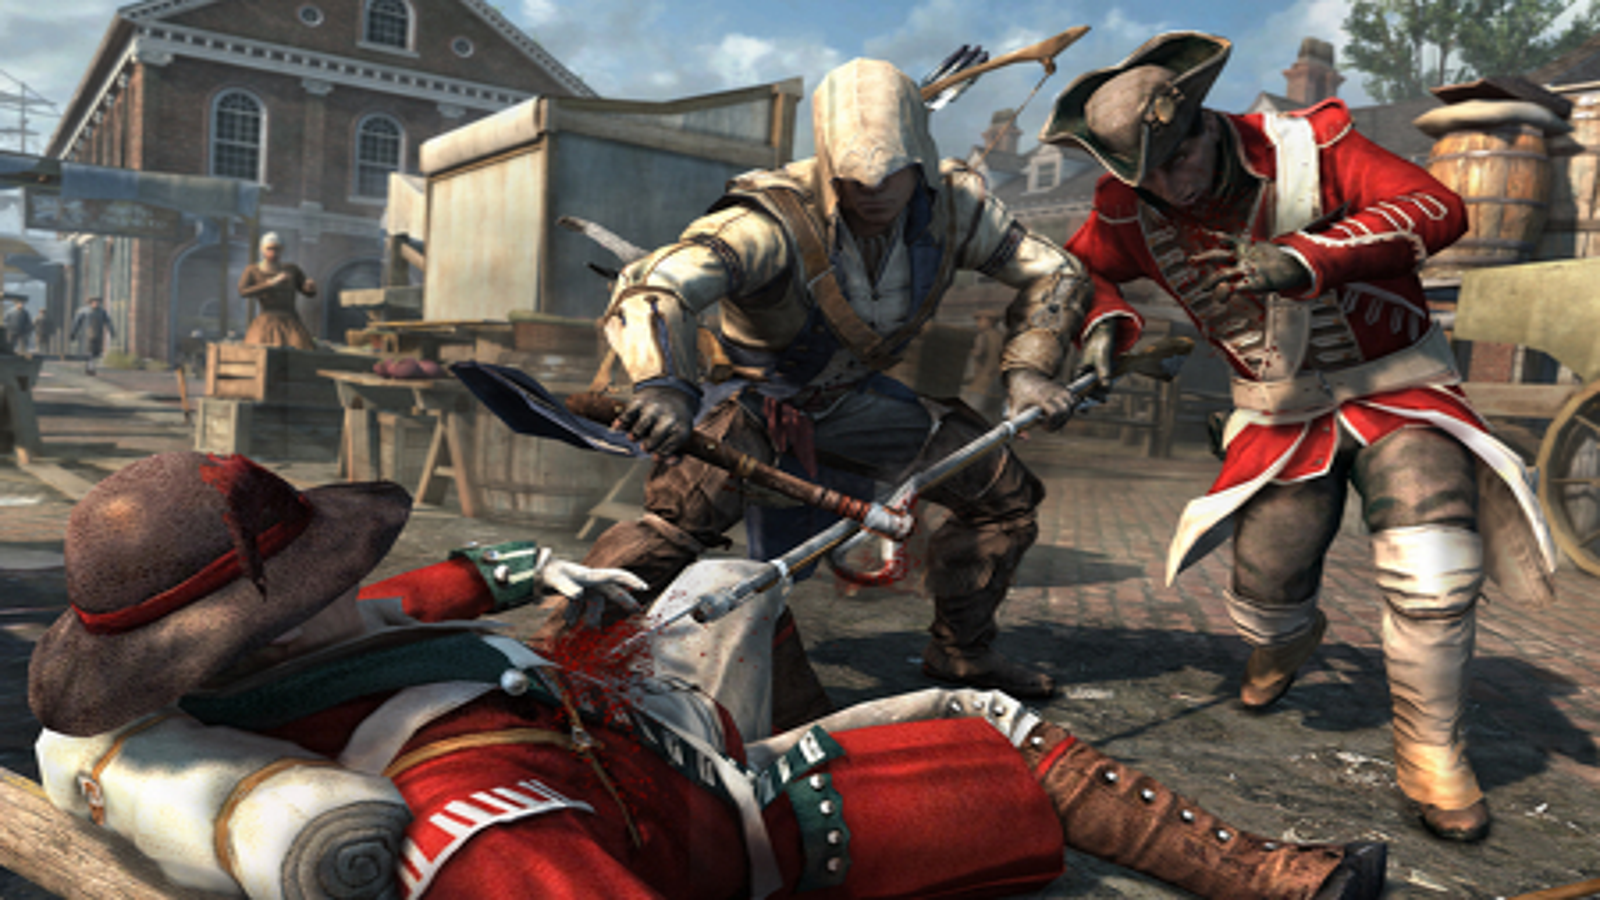 Ubisoft To Release Assassin's Creed III On October 30